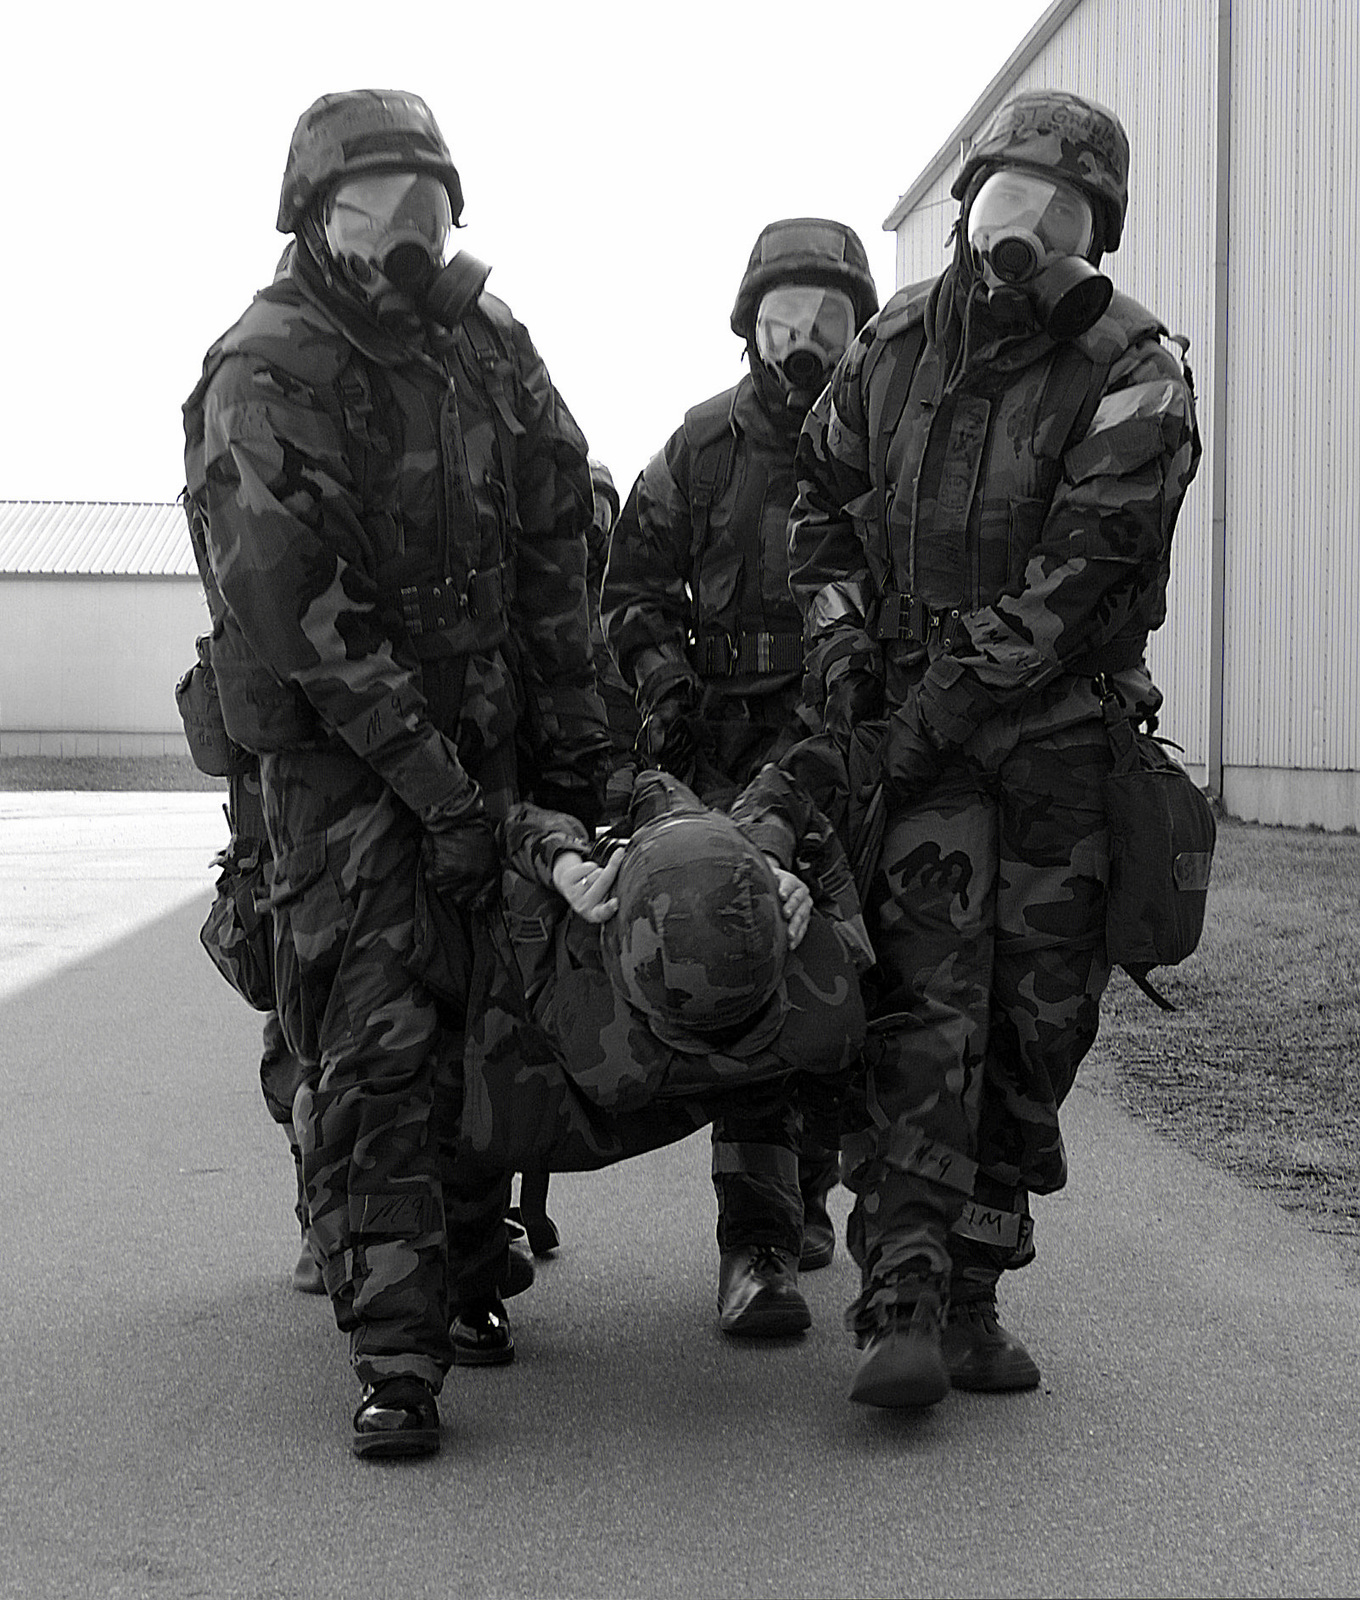 wearing-mission-oriented-protective-postures-4-mopp-4-gear-us-air-force-usaf-bb5148-1600.jpg